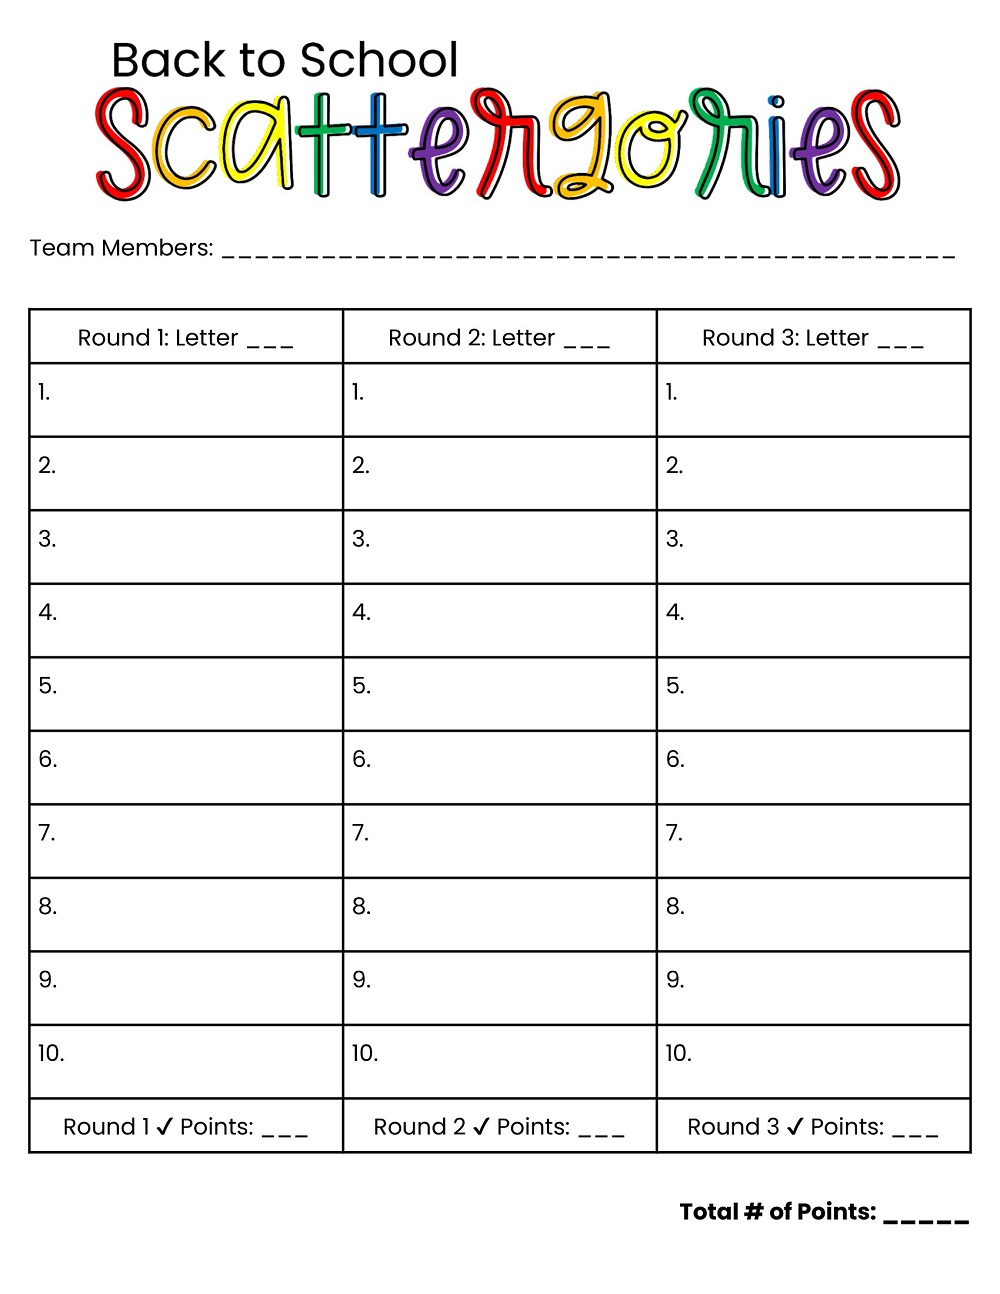 Back to School Scattergories Answer Sheet